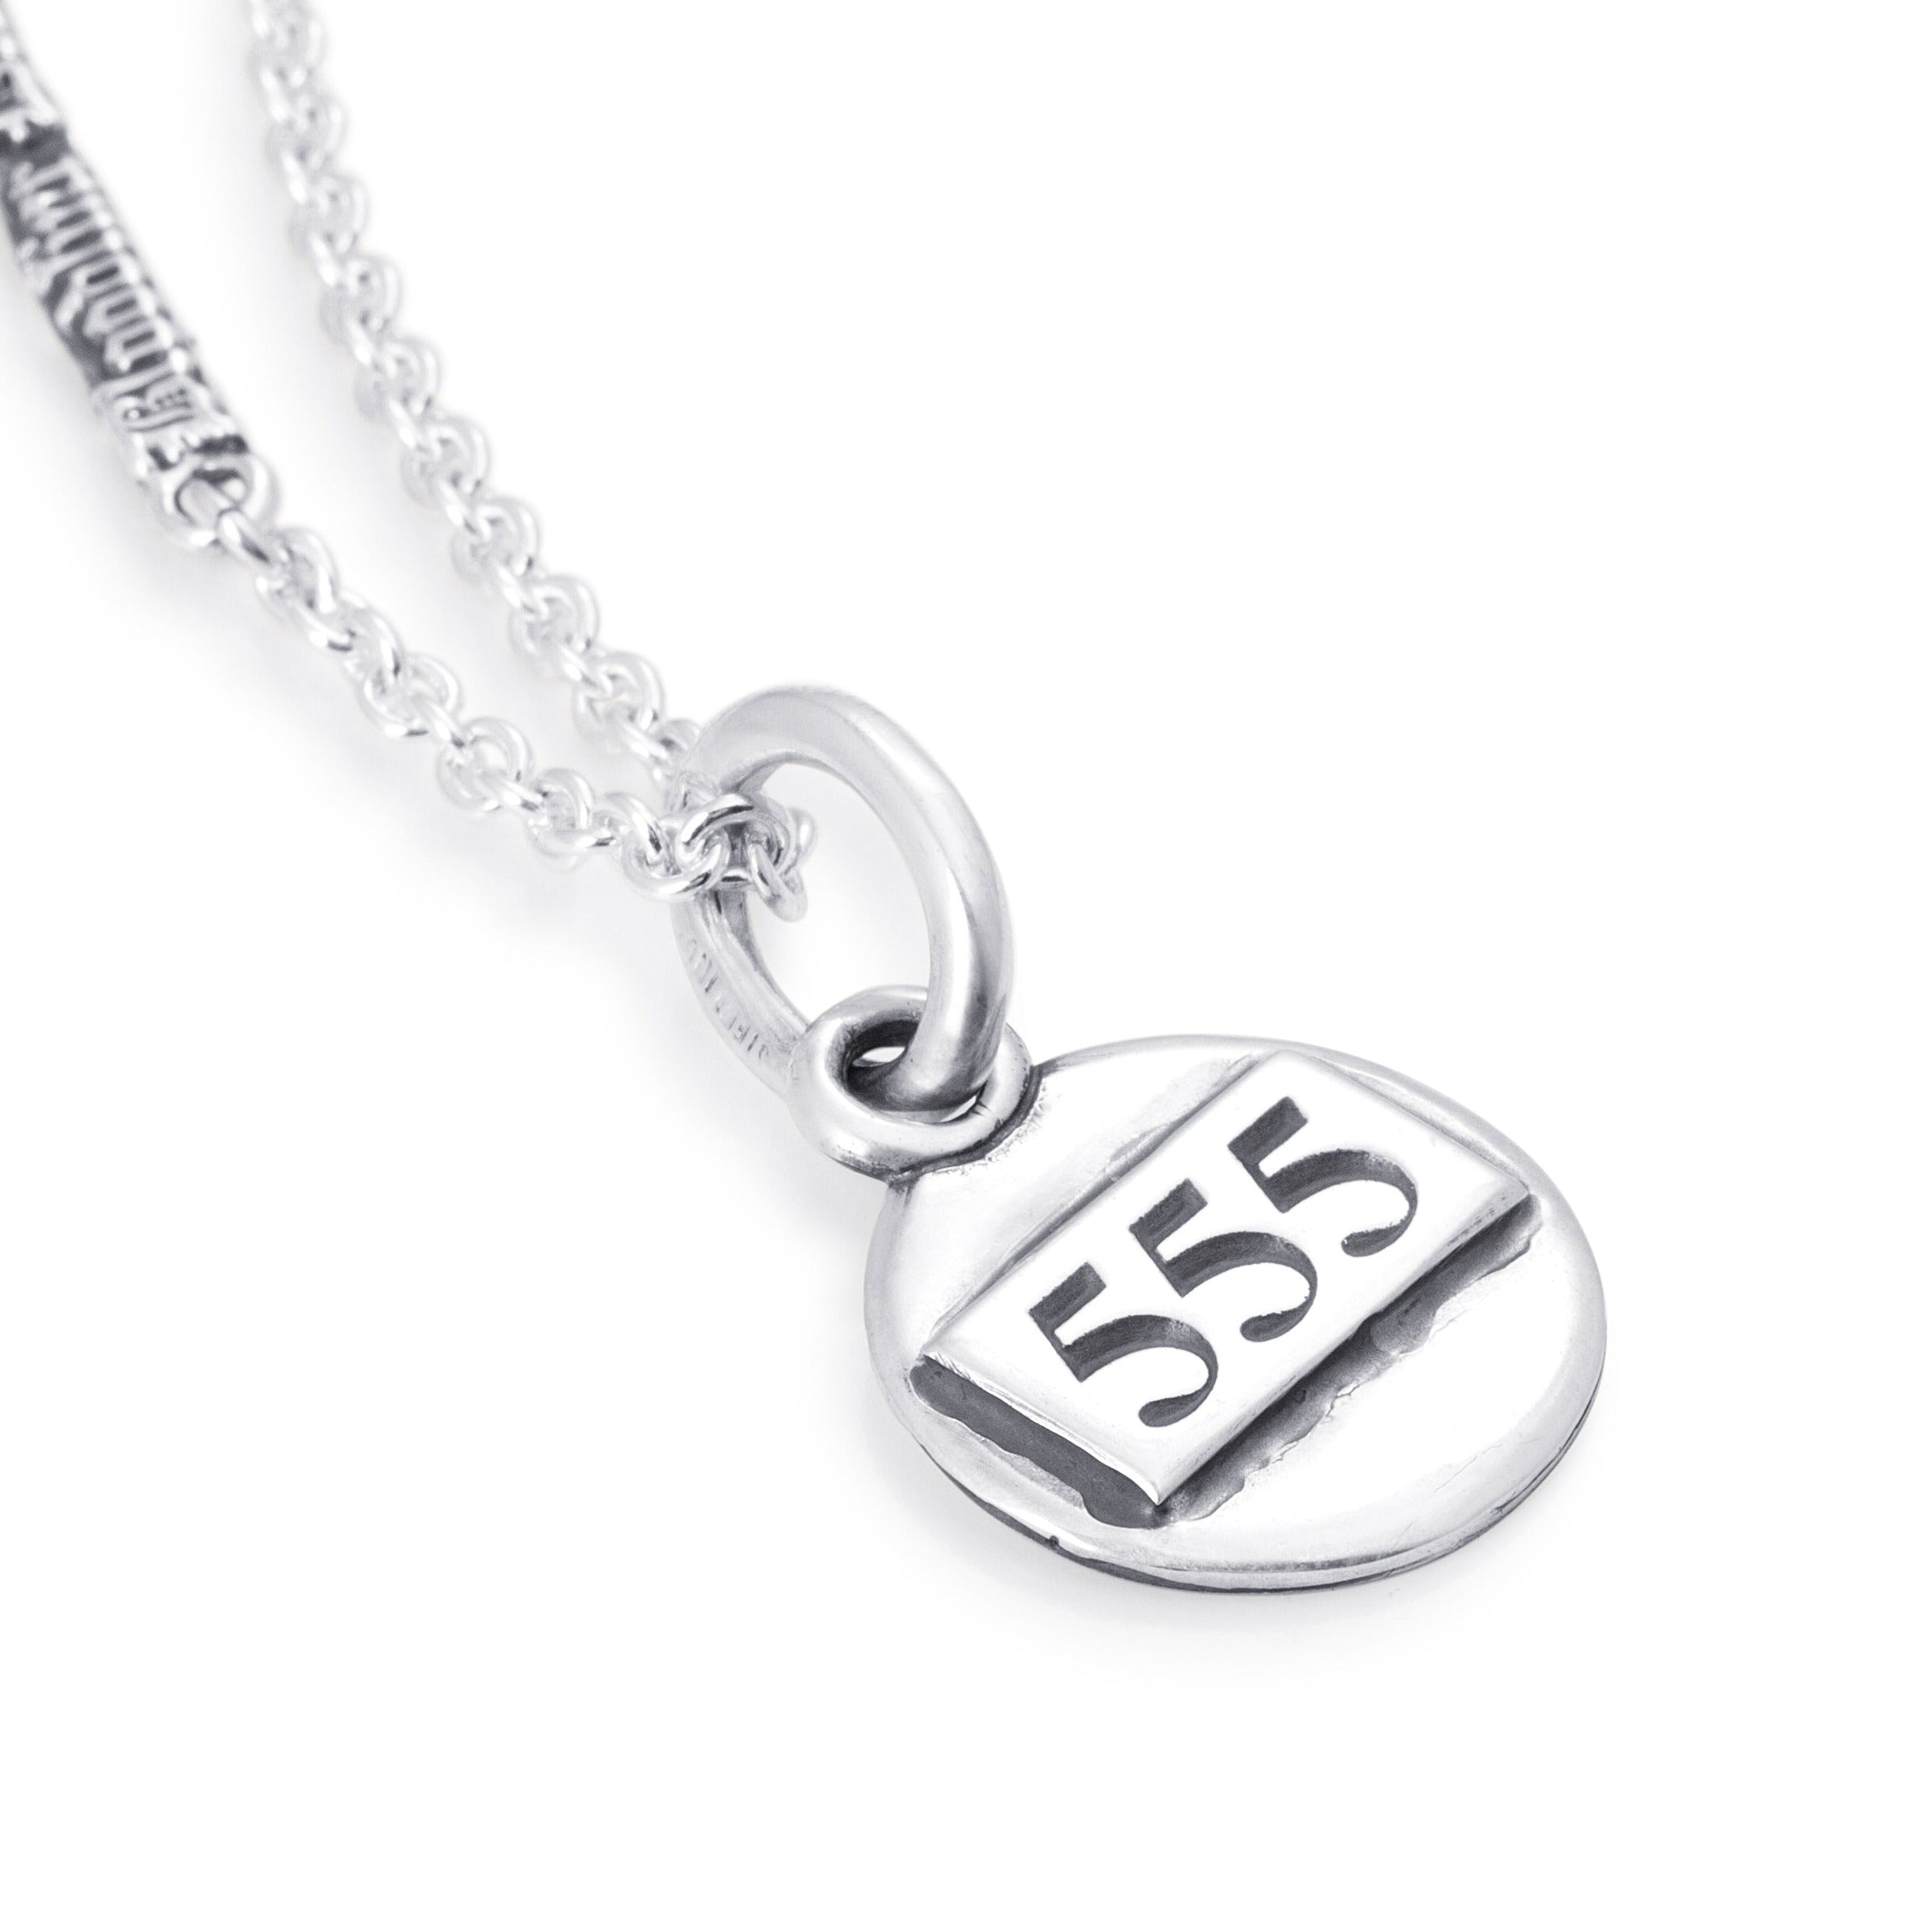 Solid Sterling Silver, centred with Angel Numbers on a plain coin shaped pendant